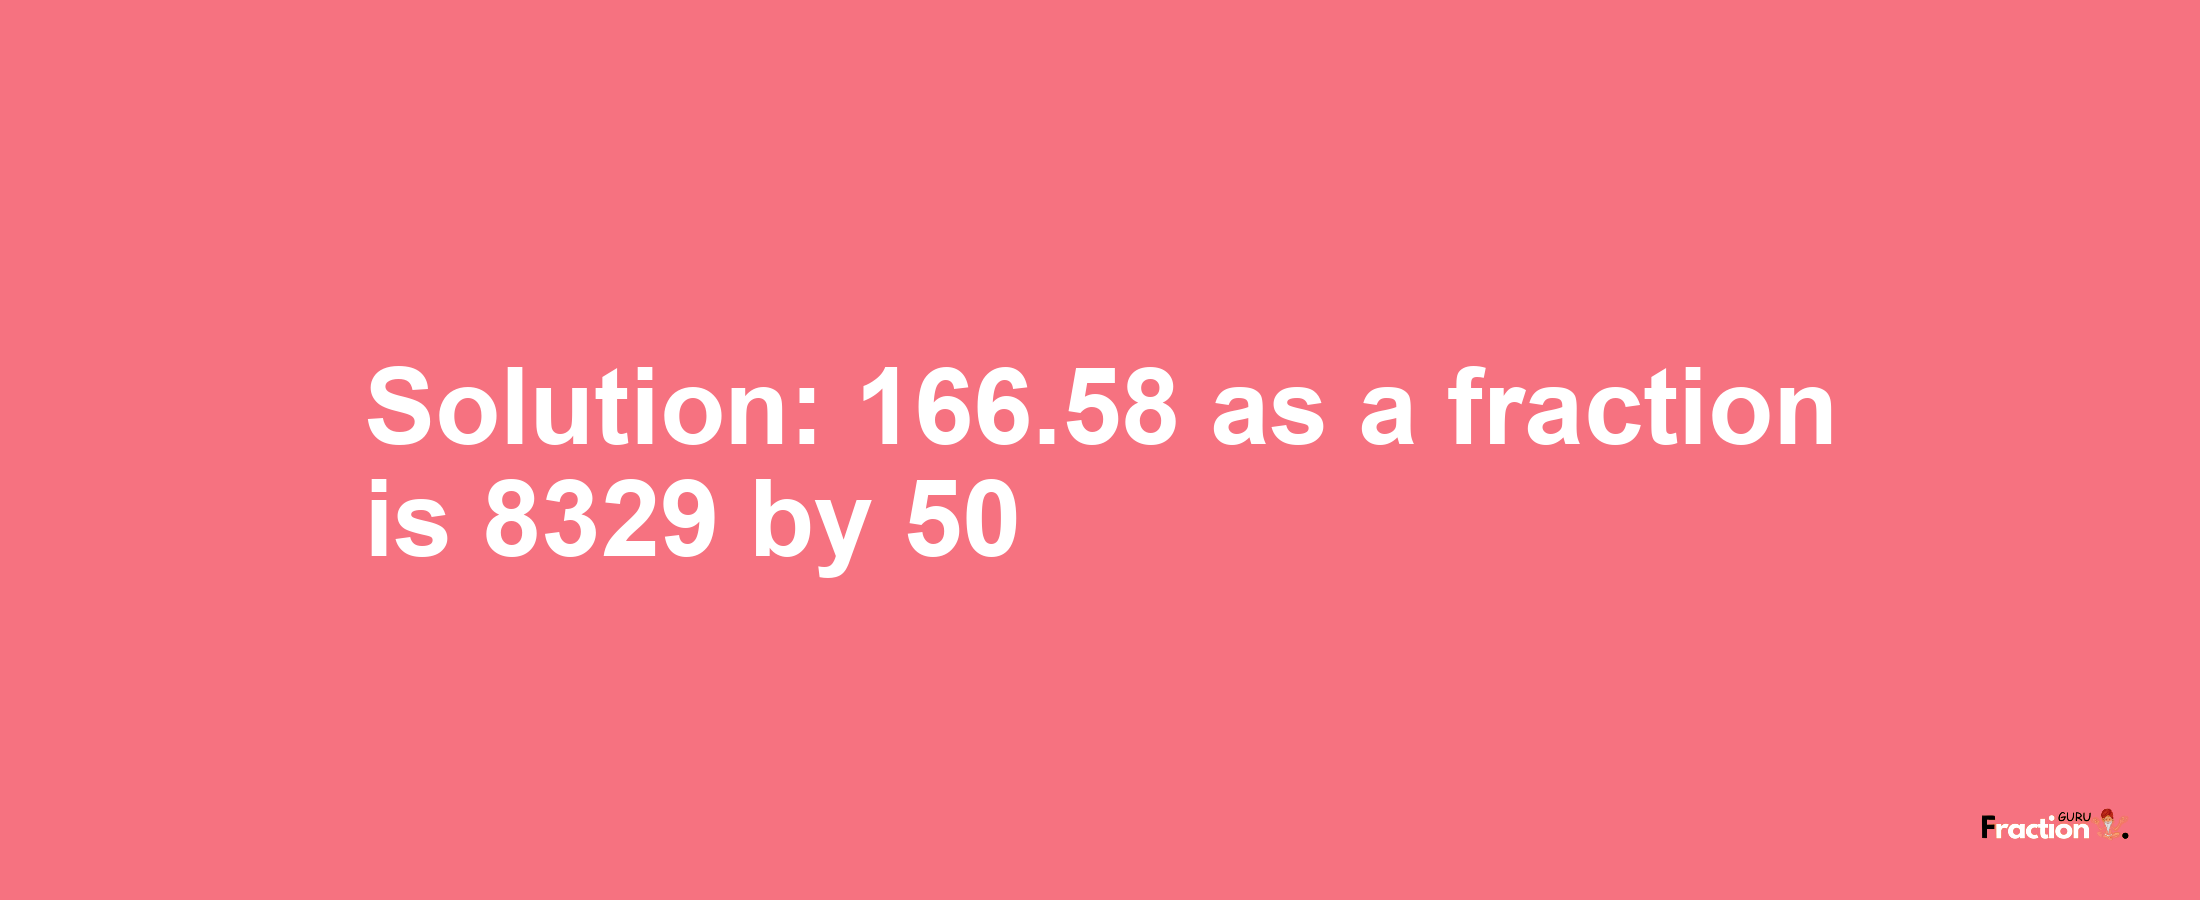 Solution:166.58 as a fraction is 8329/50